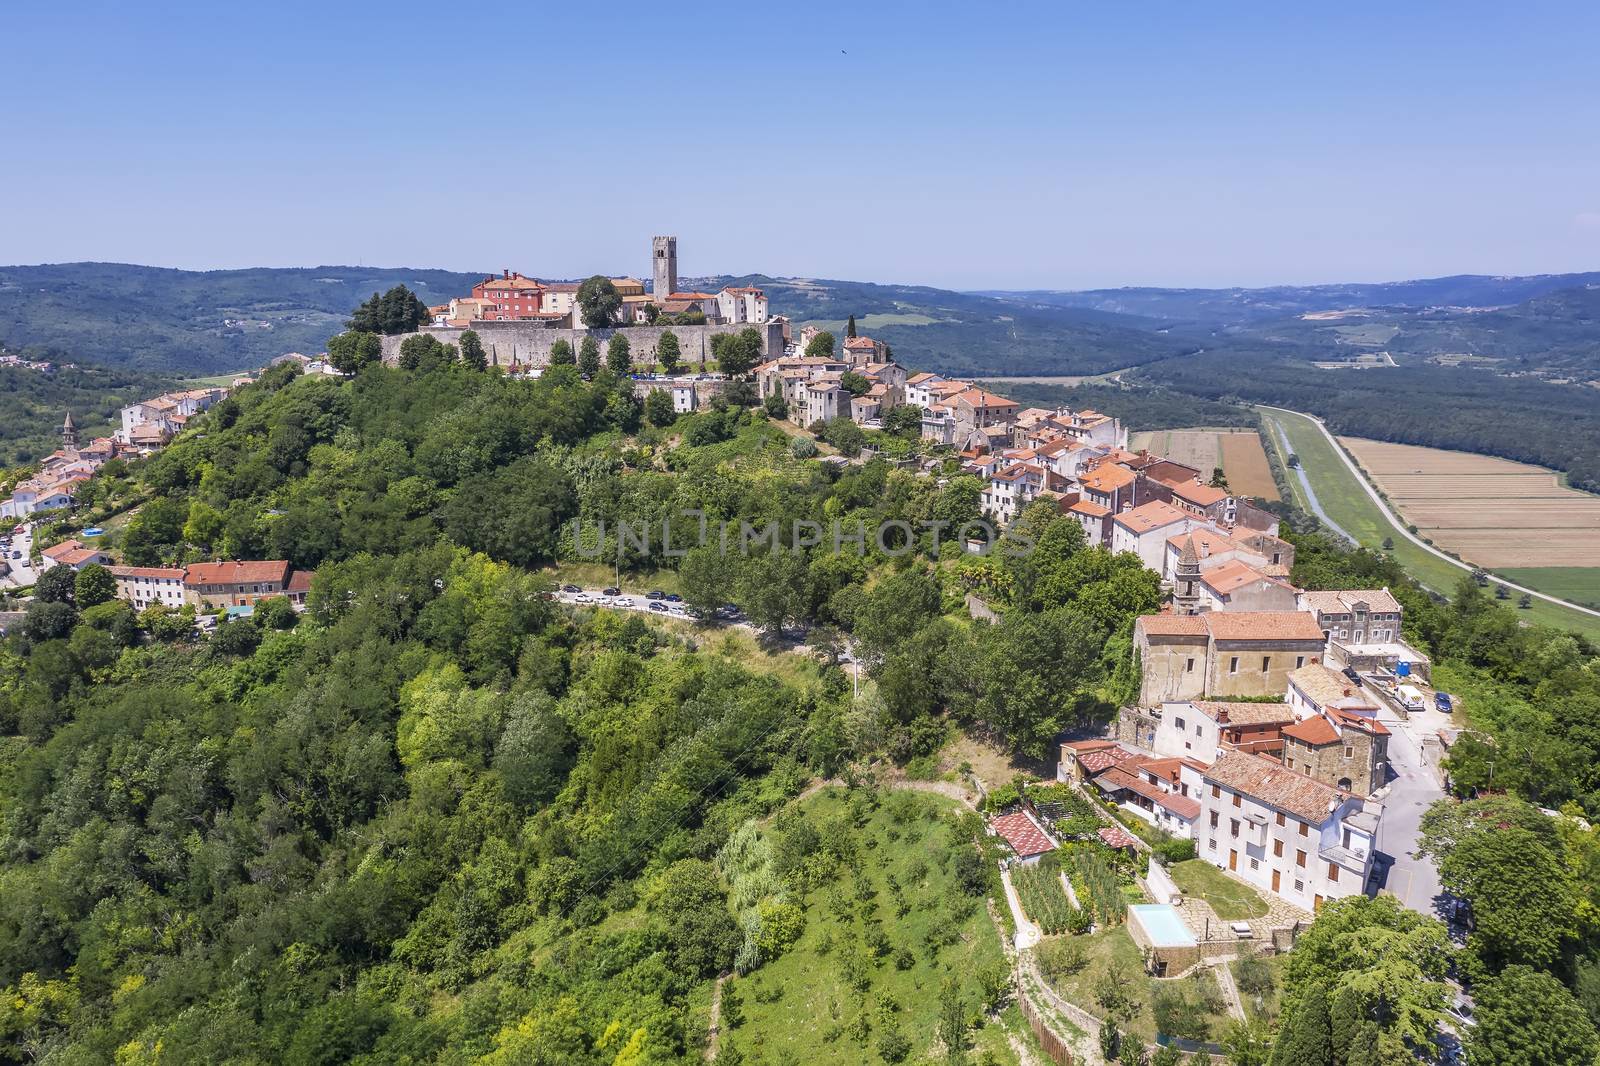 An aerial view of Motovun, settlement in central Istria, Croatia